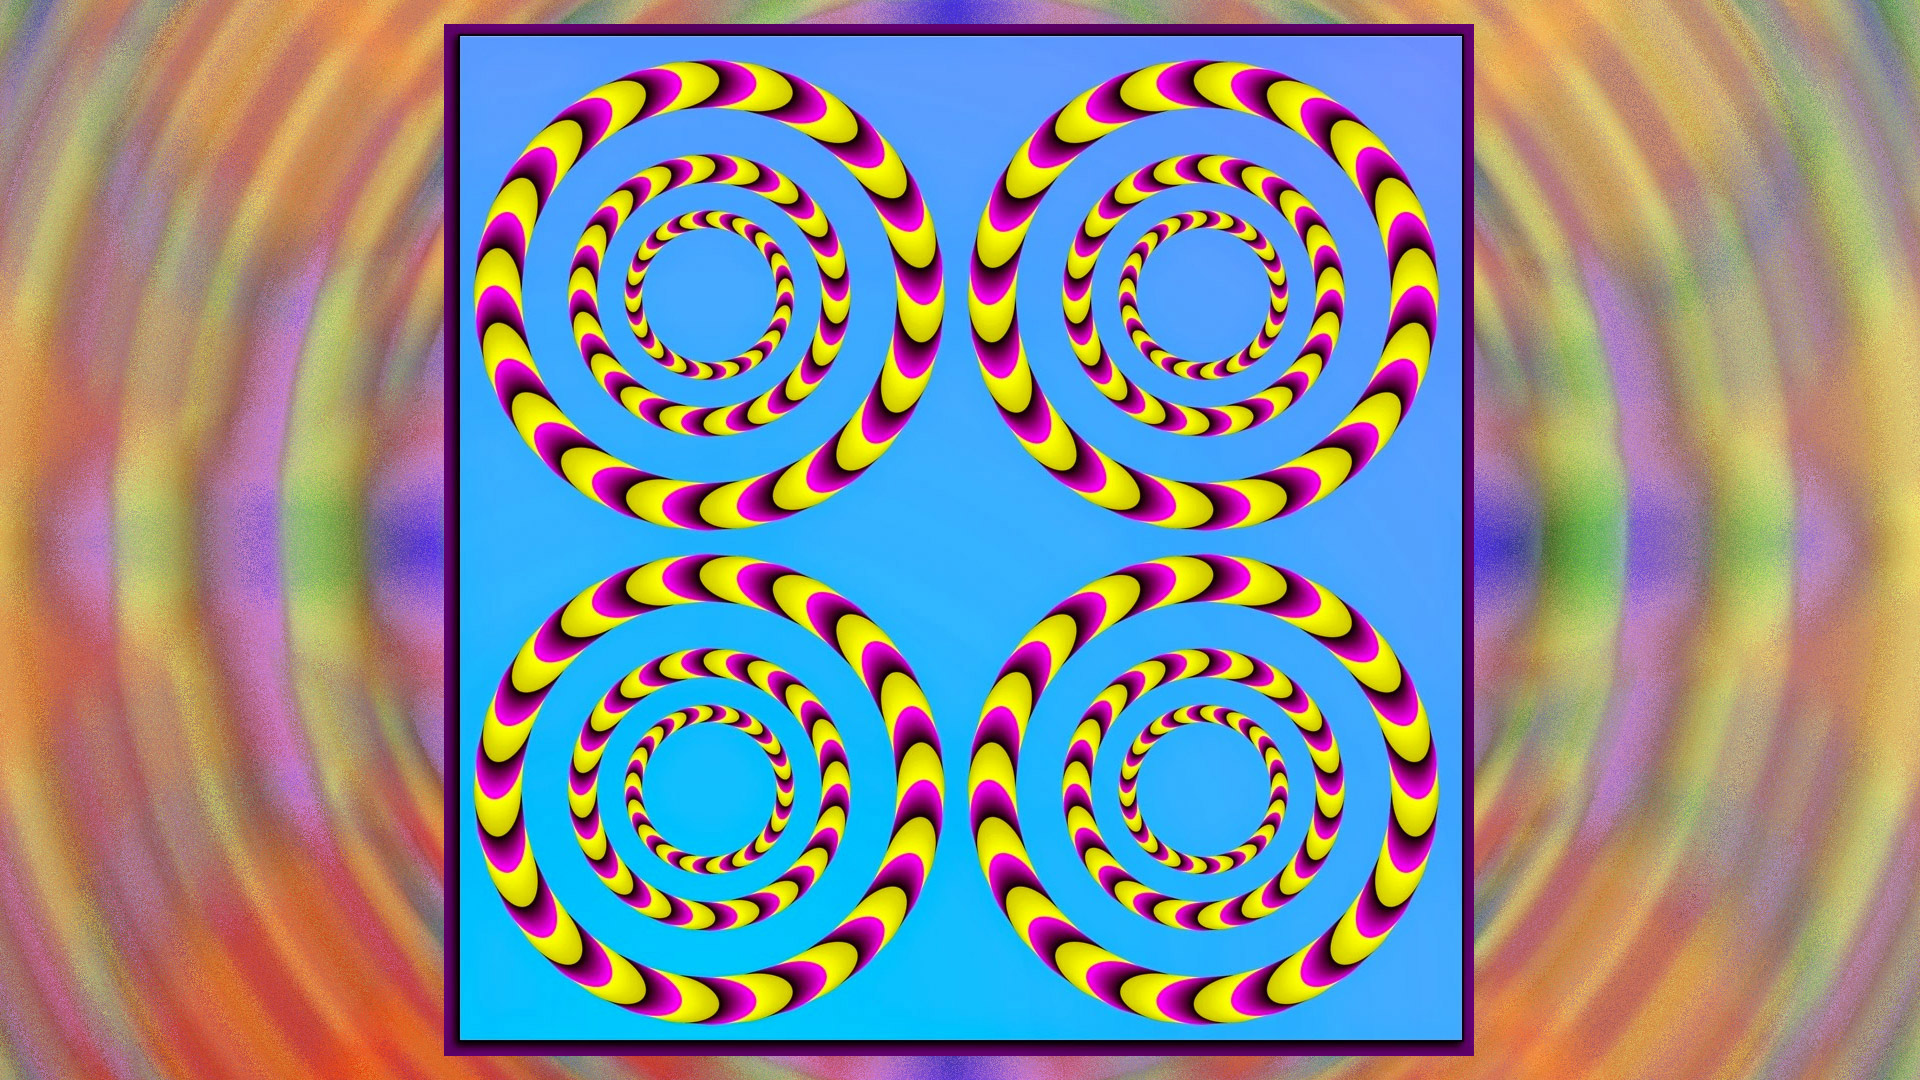 Trippy Optical Illusions That Appear to be Animated (Use as Phone